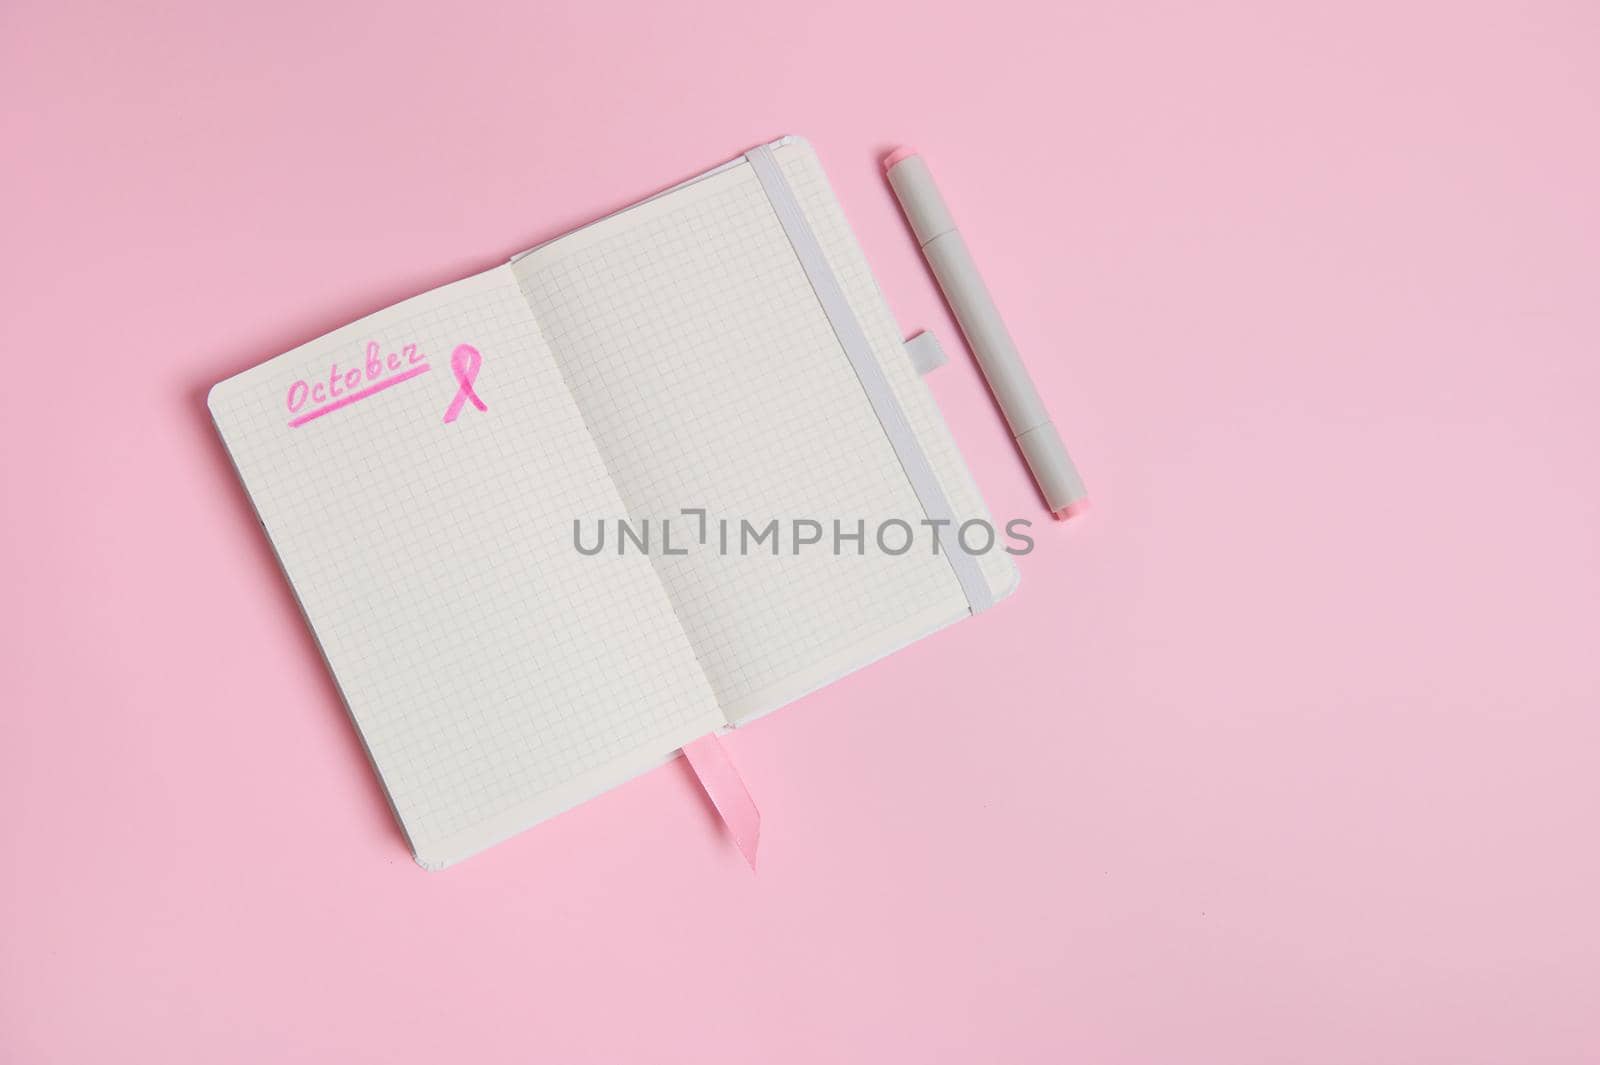 Lettering 1 st October on a diary and a pink ribbon on an empty blank paper sheet, isolated on pink background with copy space. World Breast Cancer Day